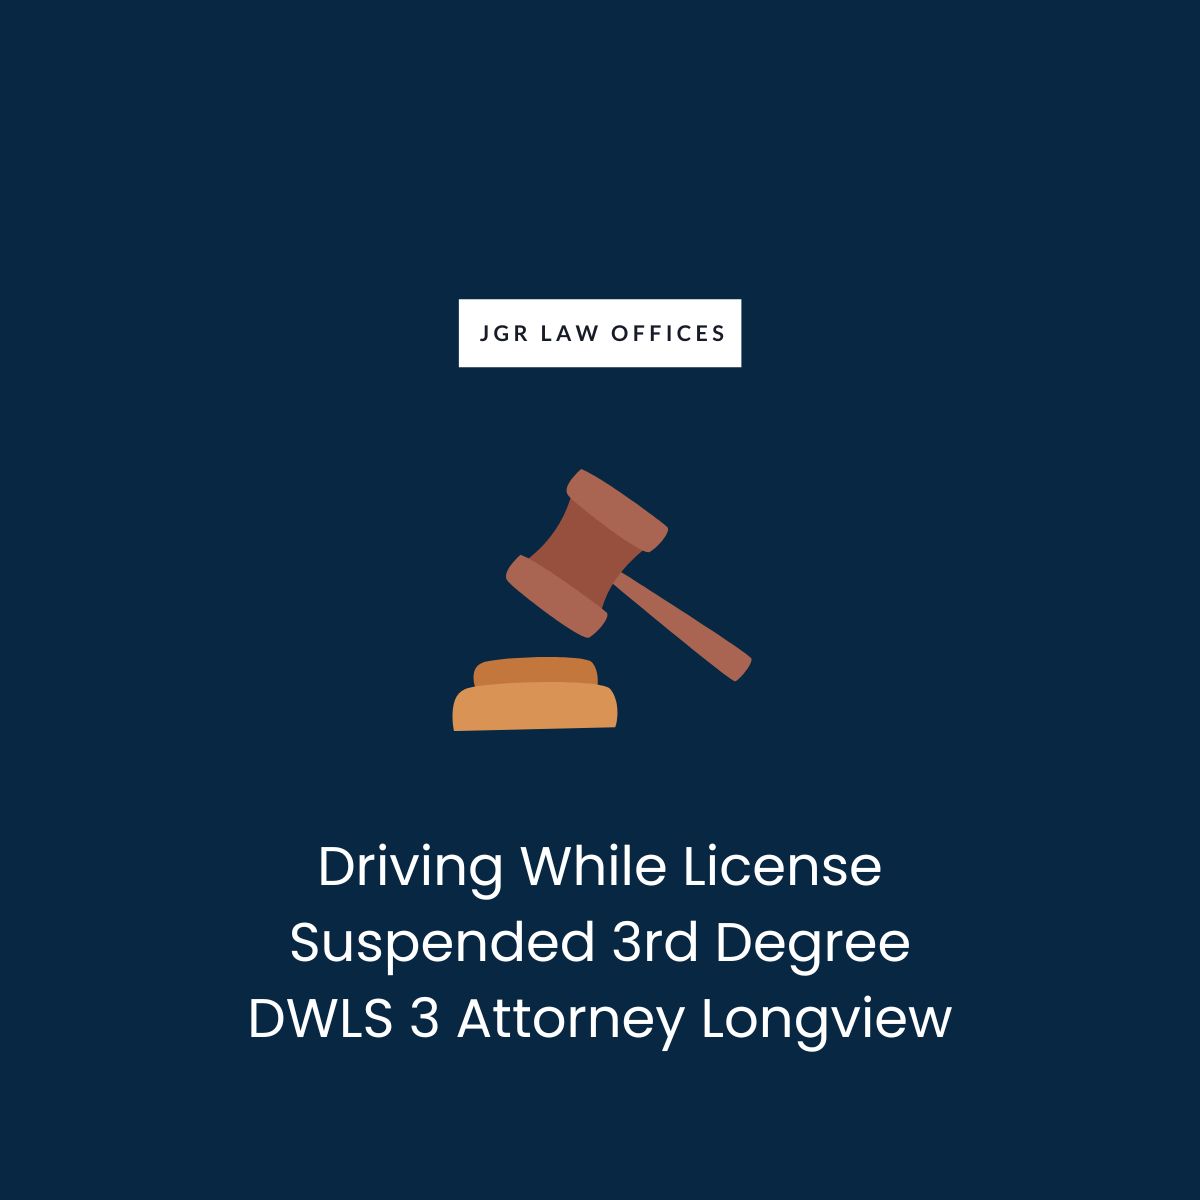 Driving While License Suspended 3rd Degree DWLS 3 Attorney Longview